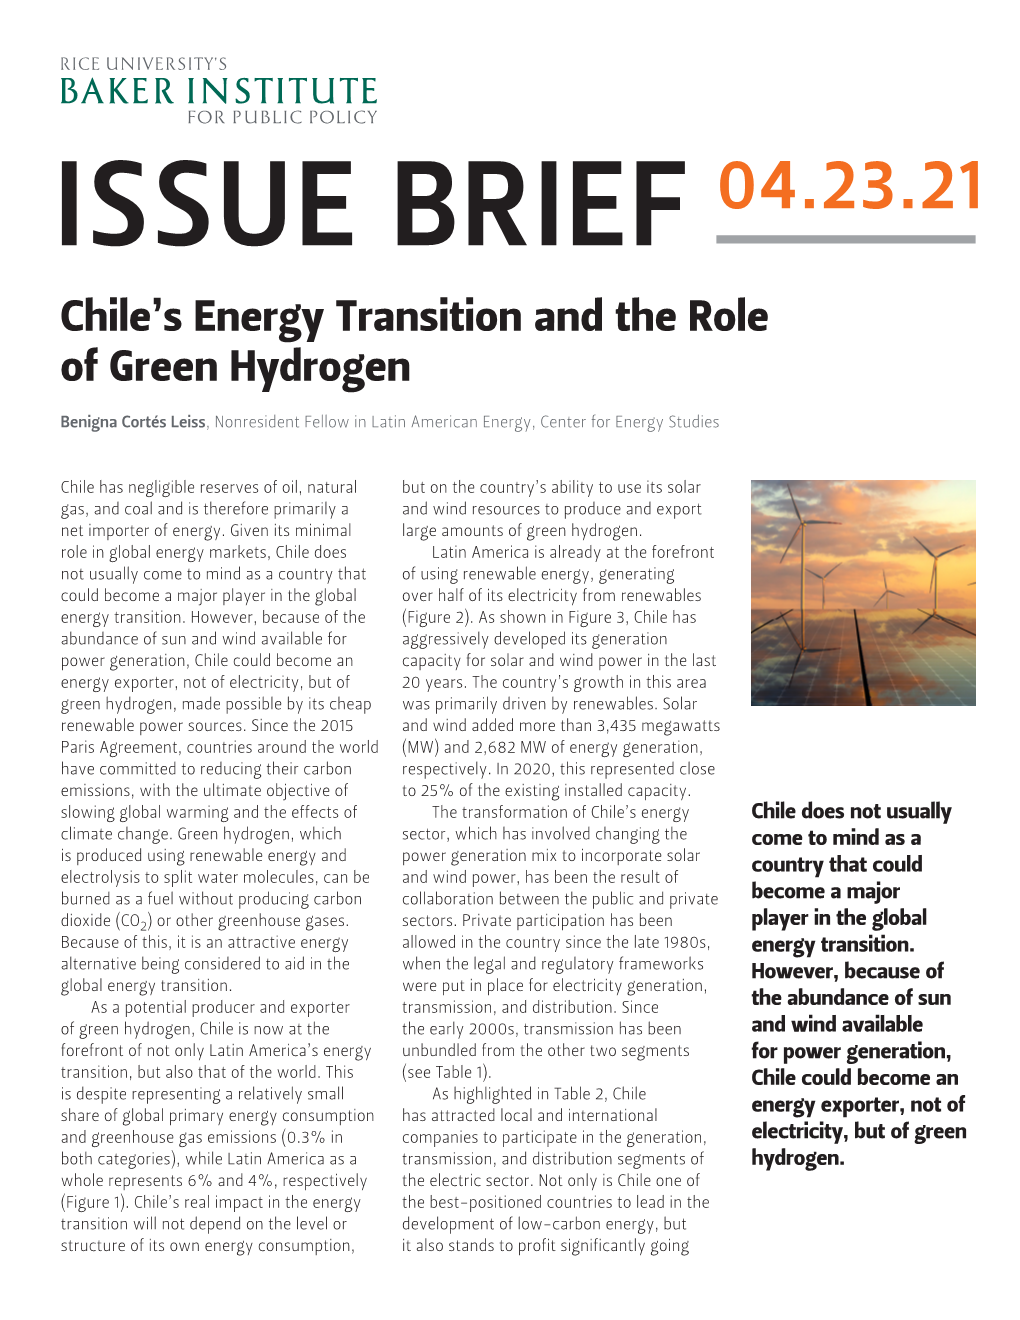 Chile's Energy Transition and the Role of Green Hydrogen